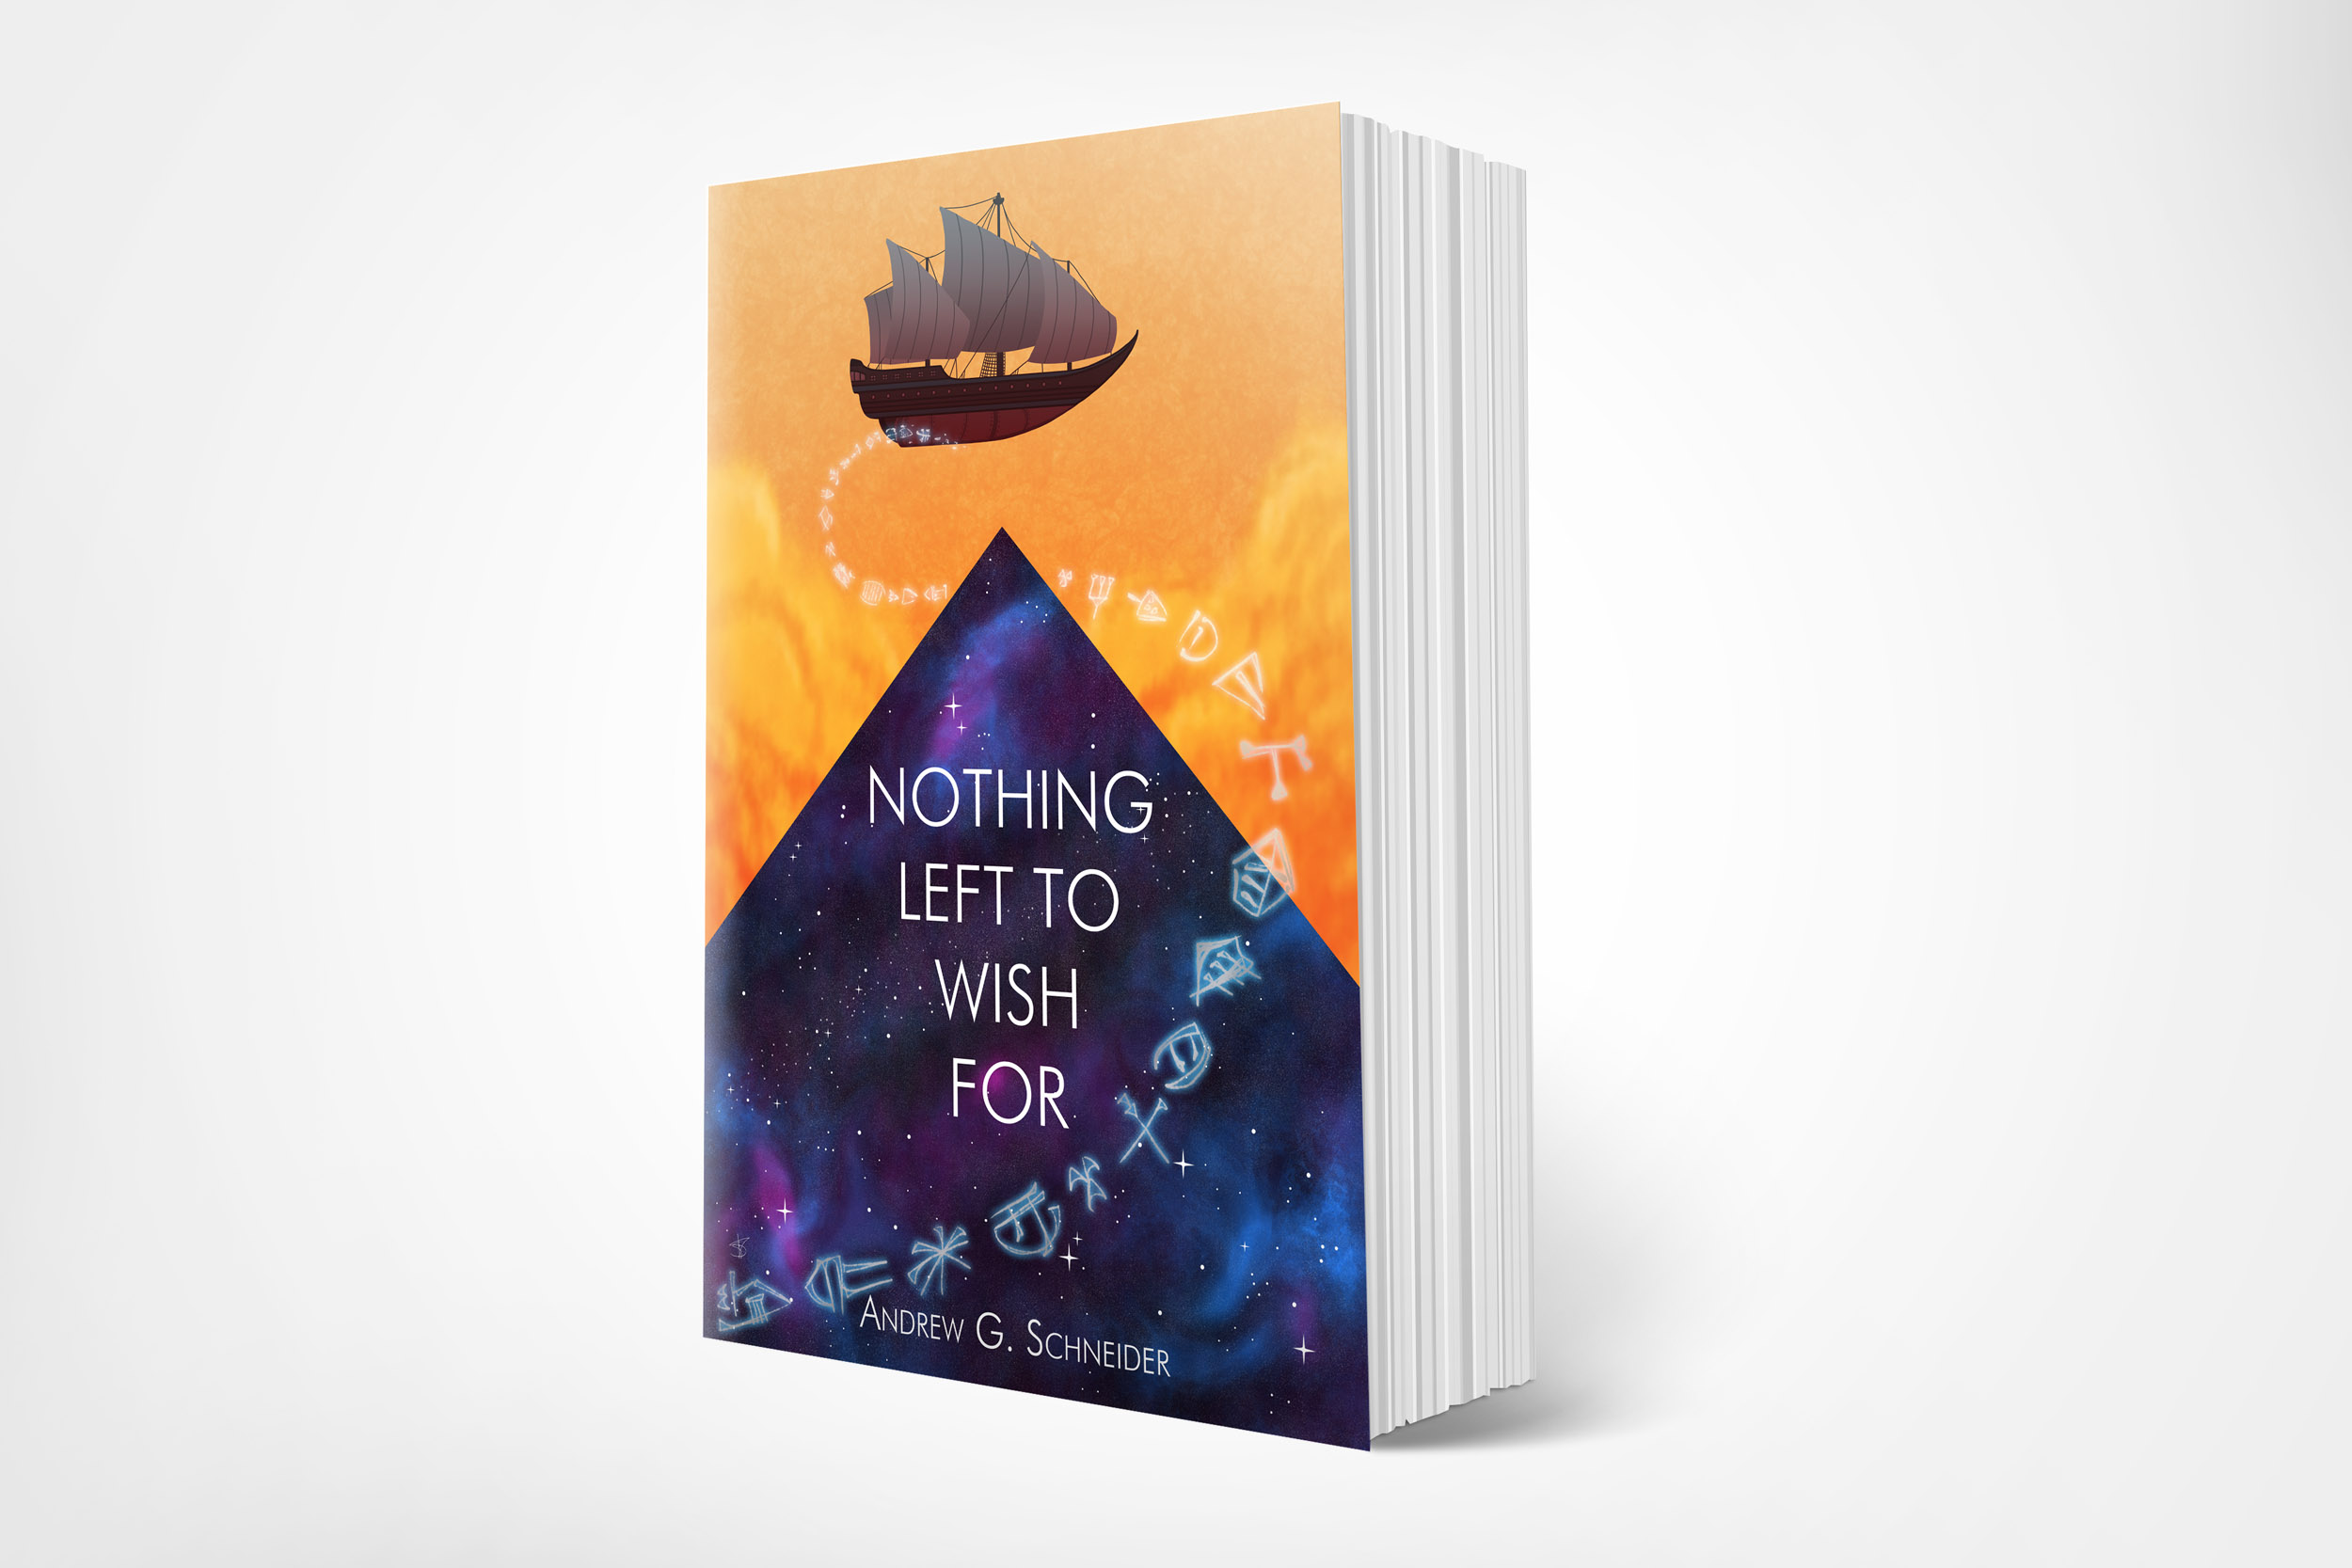 Book mockup for Nothing Left to Wish For.